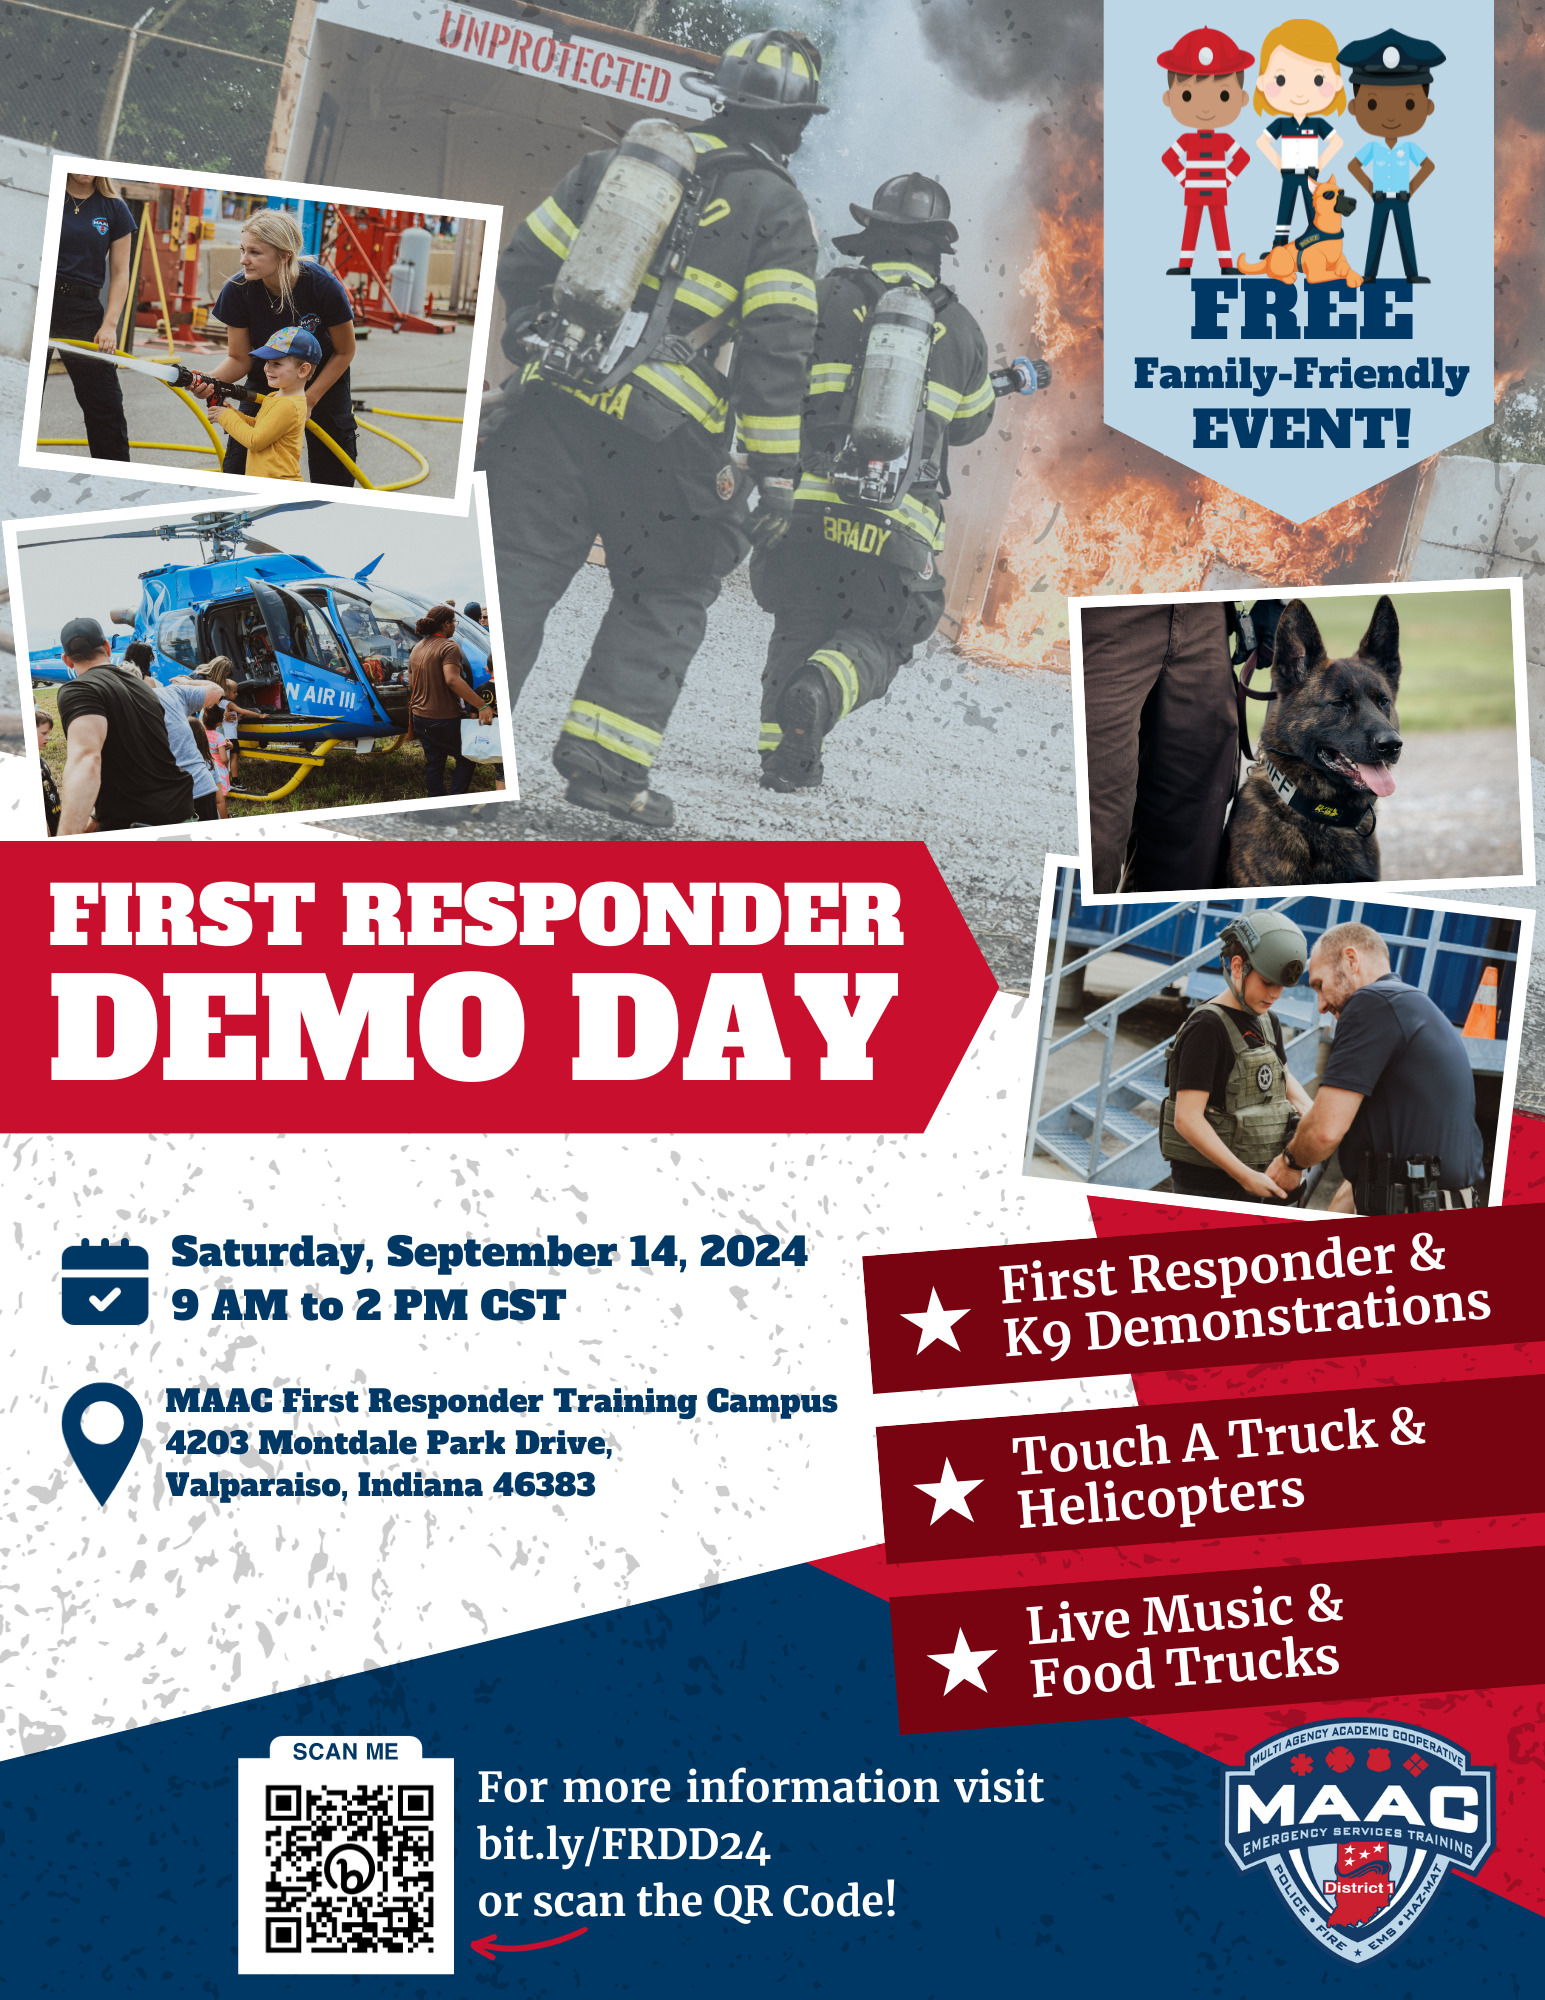 Chance to Thank and Learn More About First Responders